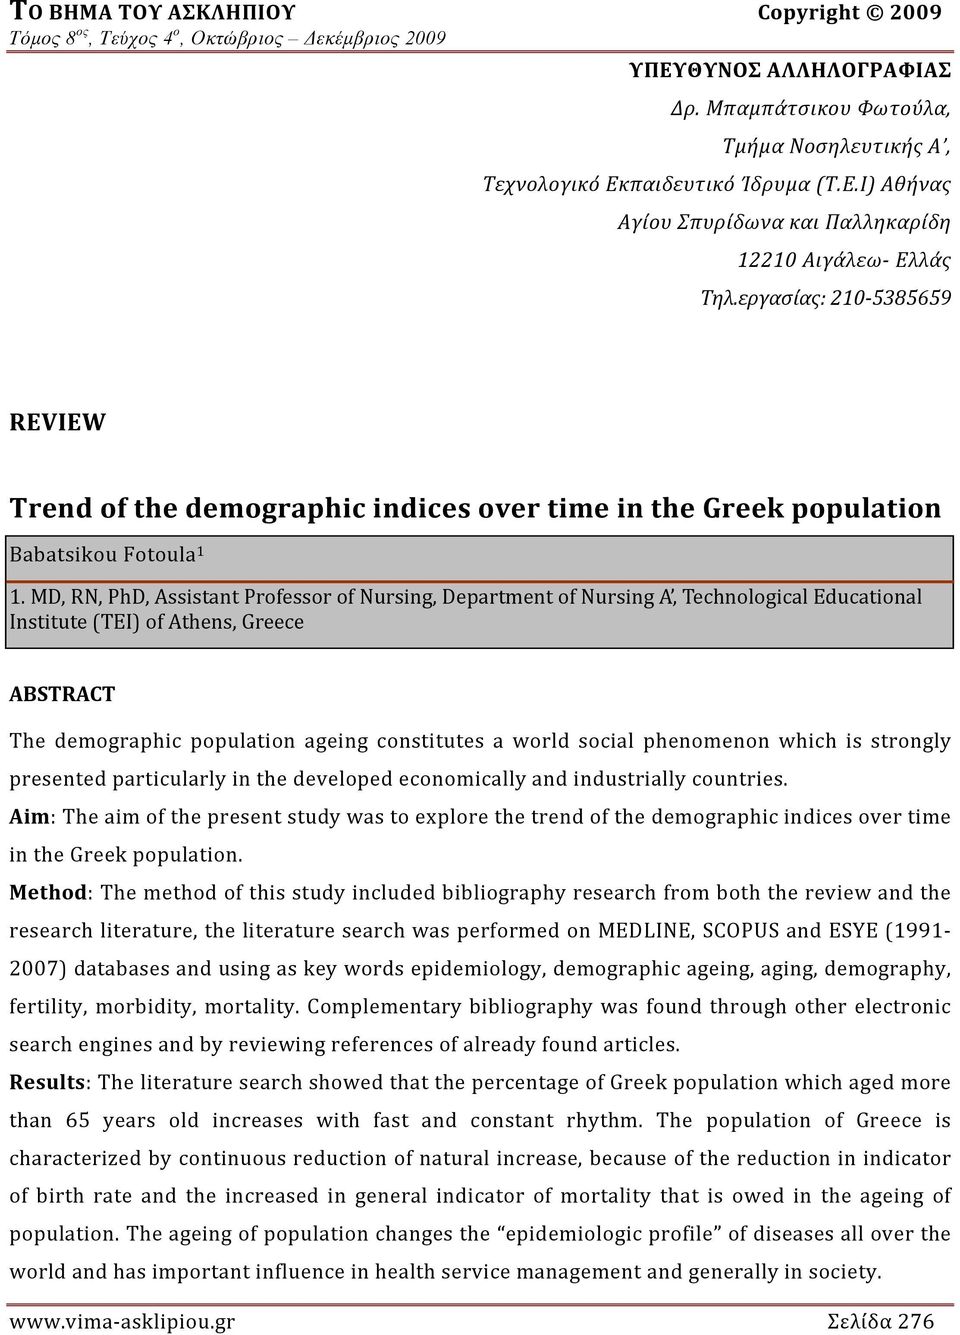 MD, RN, PhD, Assistant Professor of Nursing, Department of Nursing A, Technological Educational Institute (TEI) of Athens, Greece ABSTRACT The demographic population ageing constitutes a world social